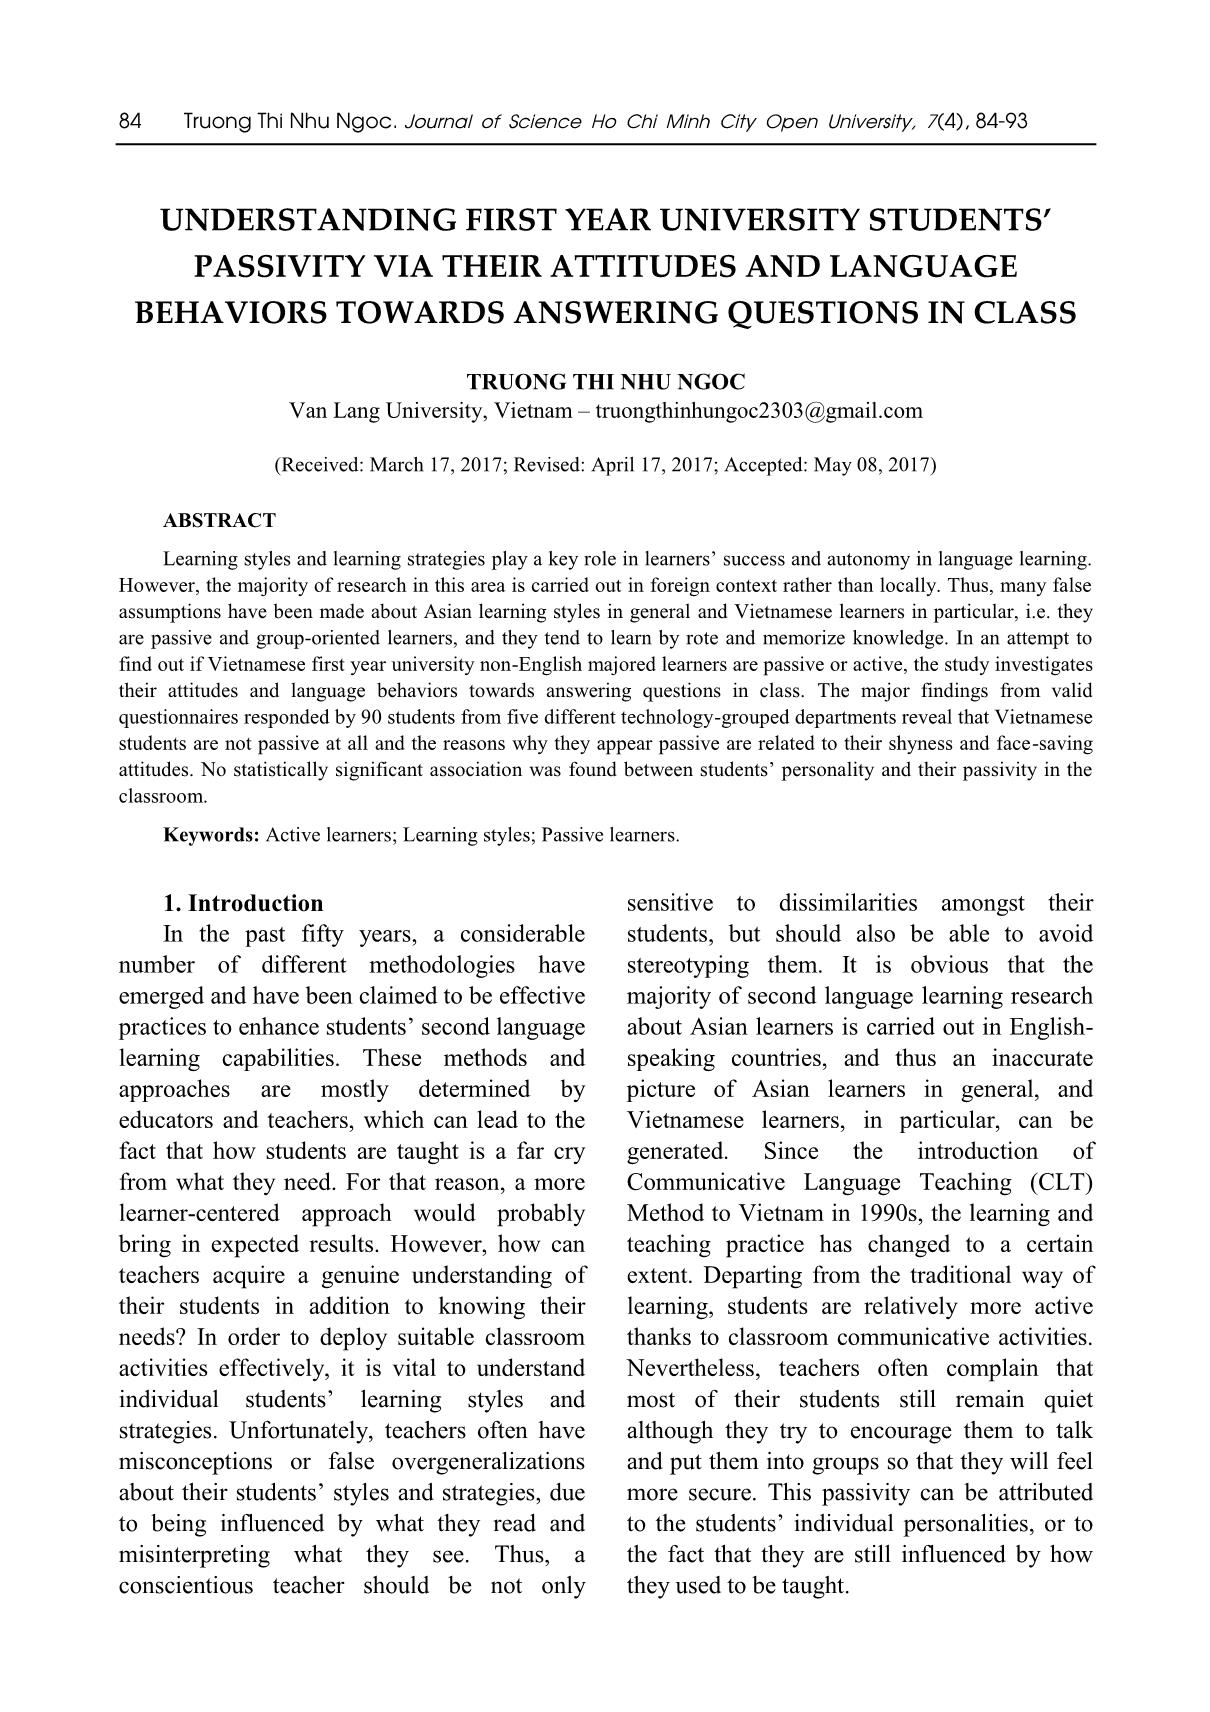 Understanding first year university students’ passivity via their attitudes and language behaviors towards answering questions in class trang 1